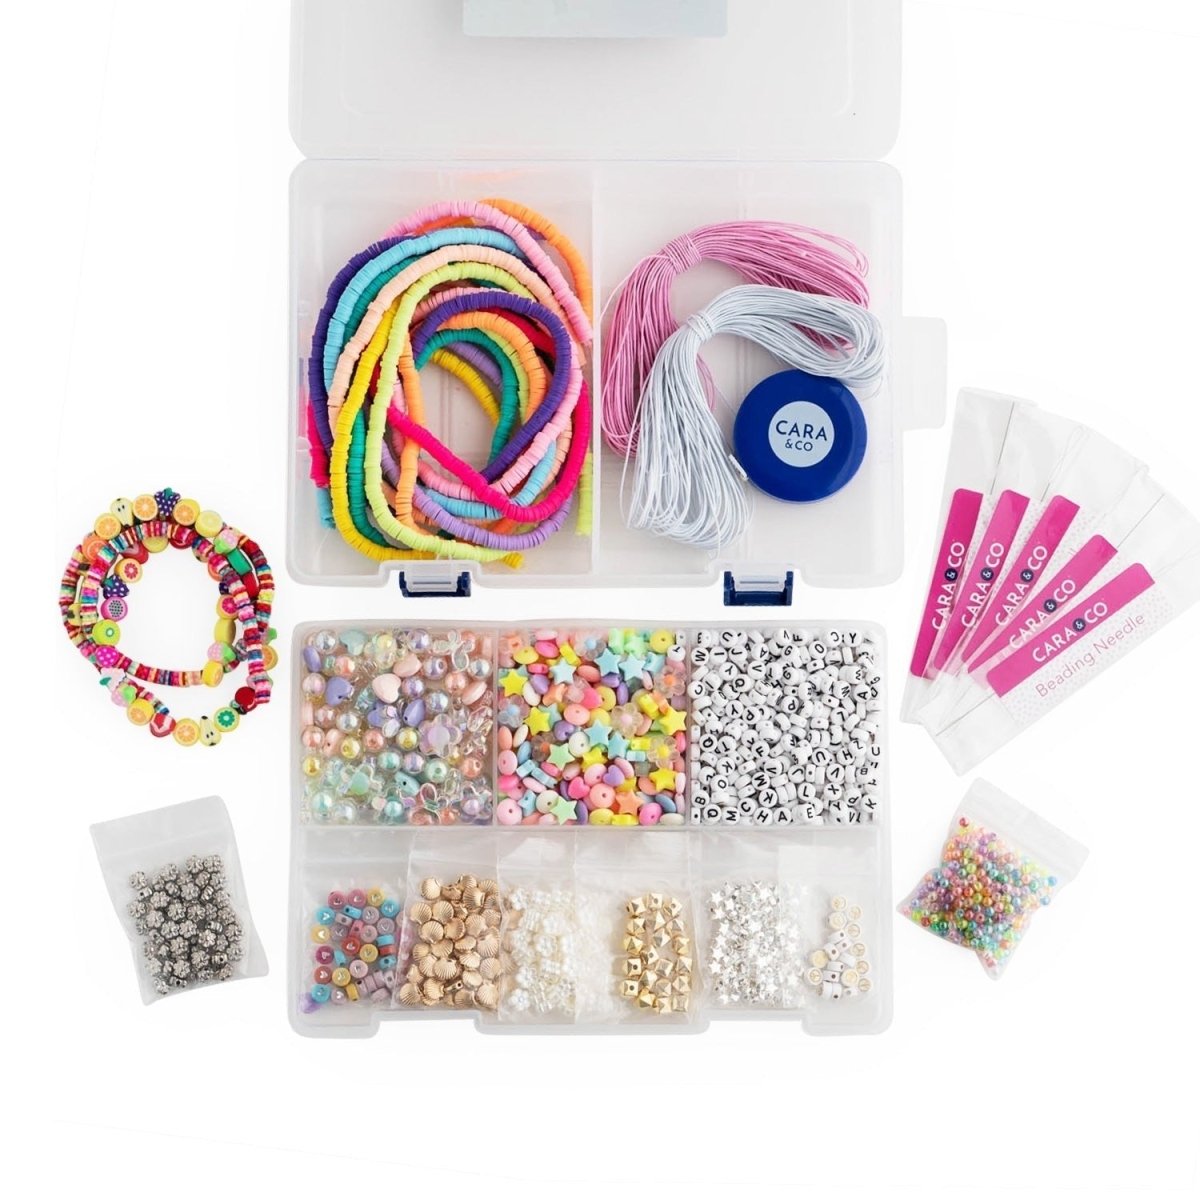 Party Boxes Party Box Friendship Bracelet Kit from Cara & Co Craft Supply